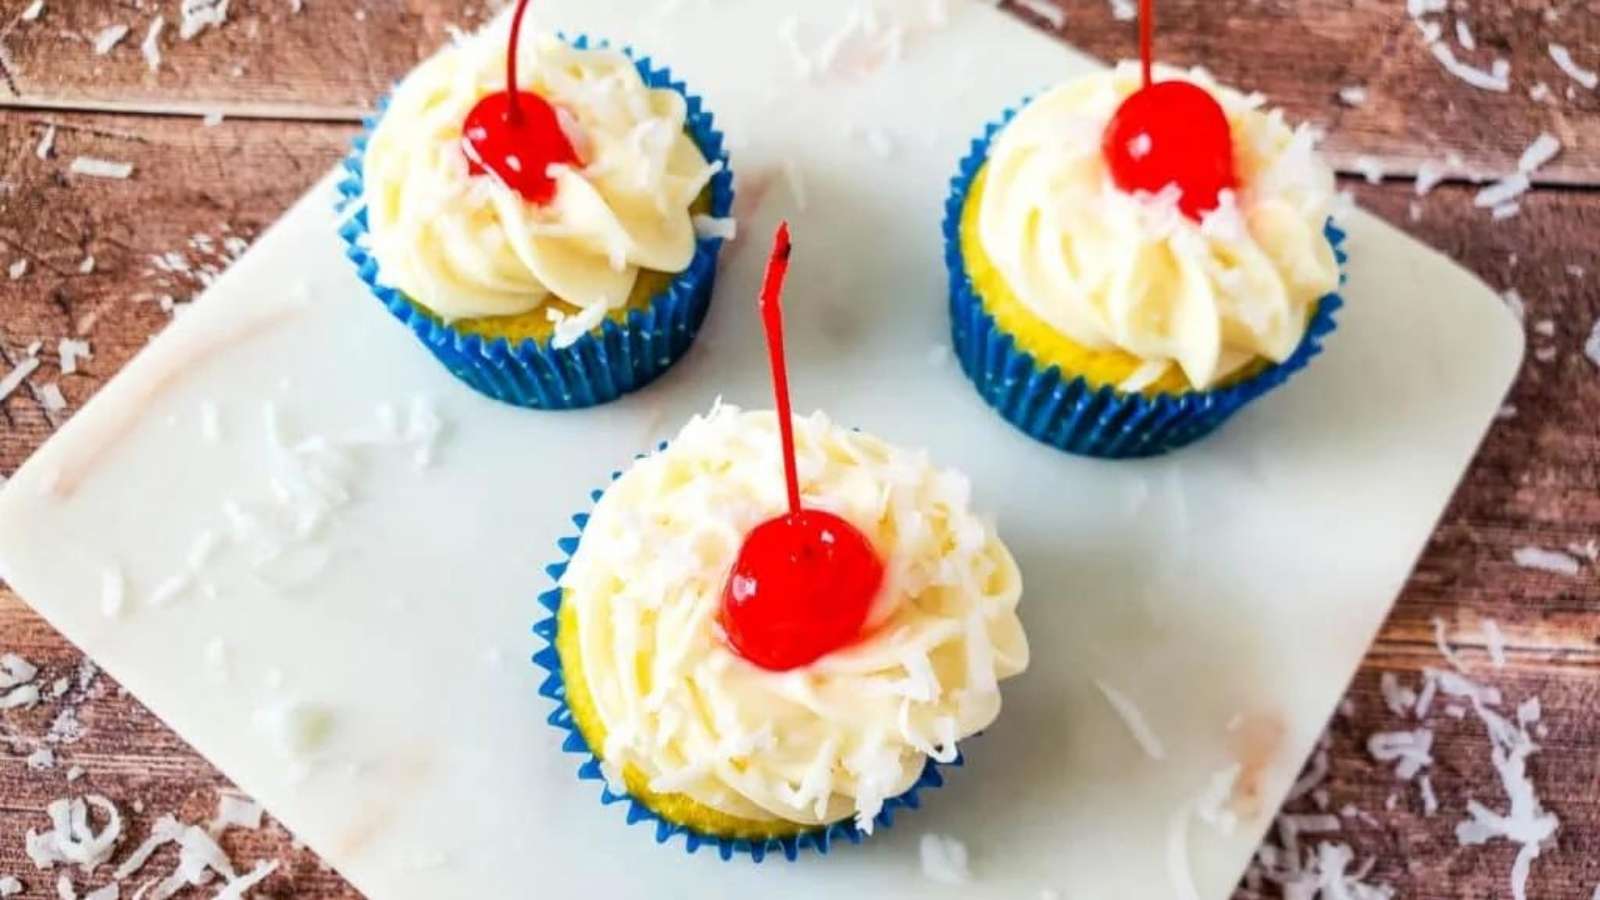 Three coconut cupcakes with a cherry on top.